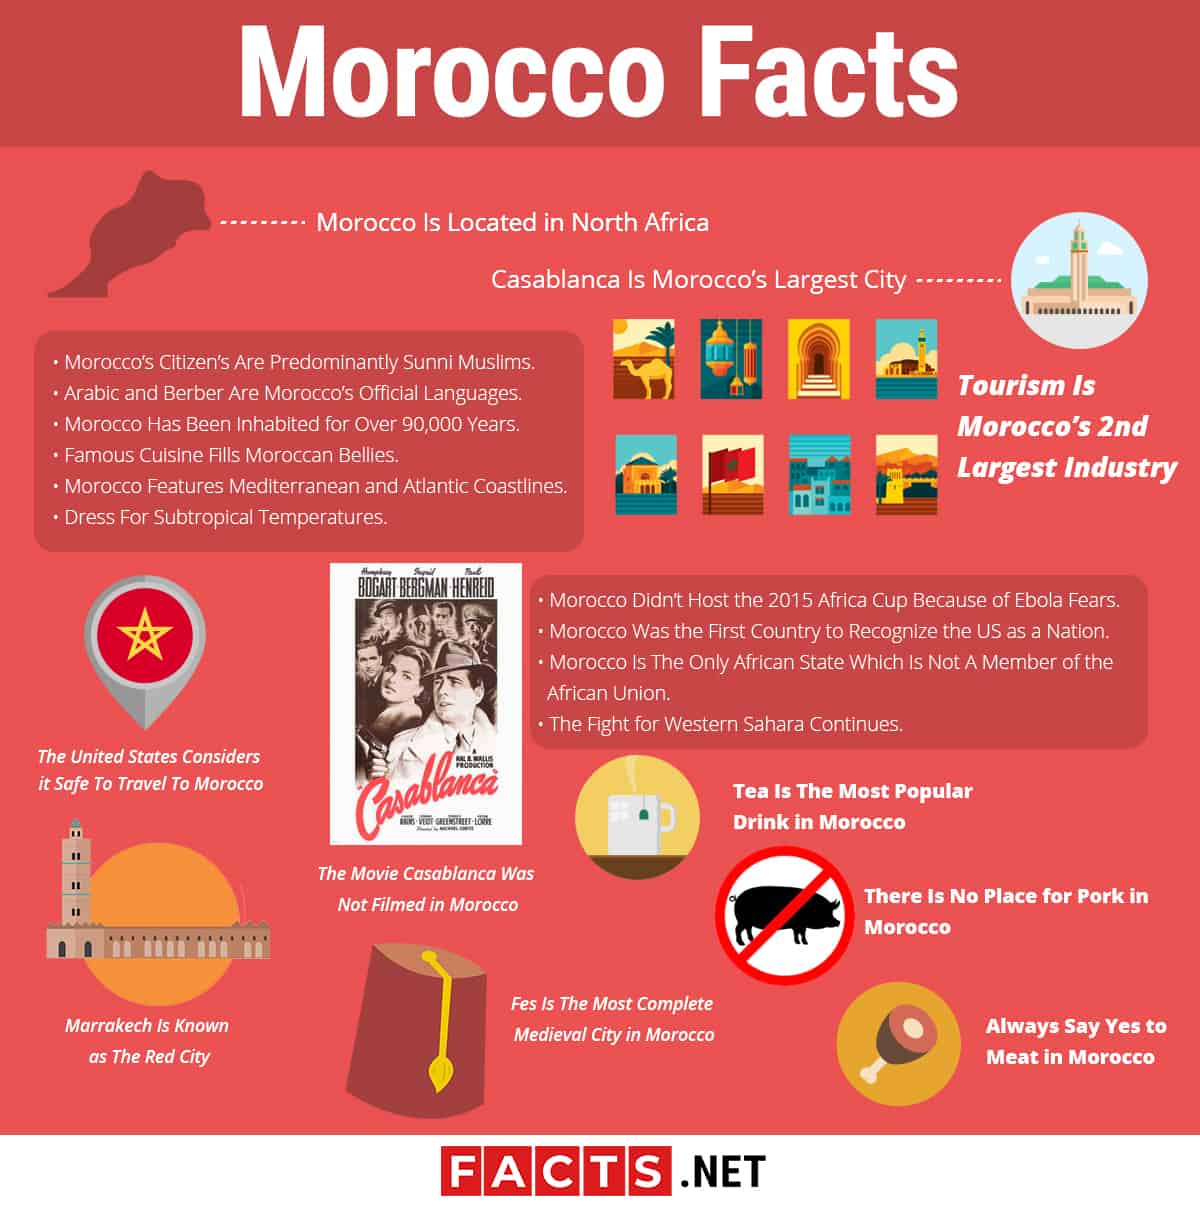 Top 20 Morocco Facts - Religion, Language, Culture & More | Facts.net